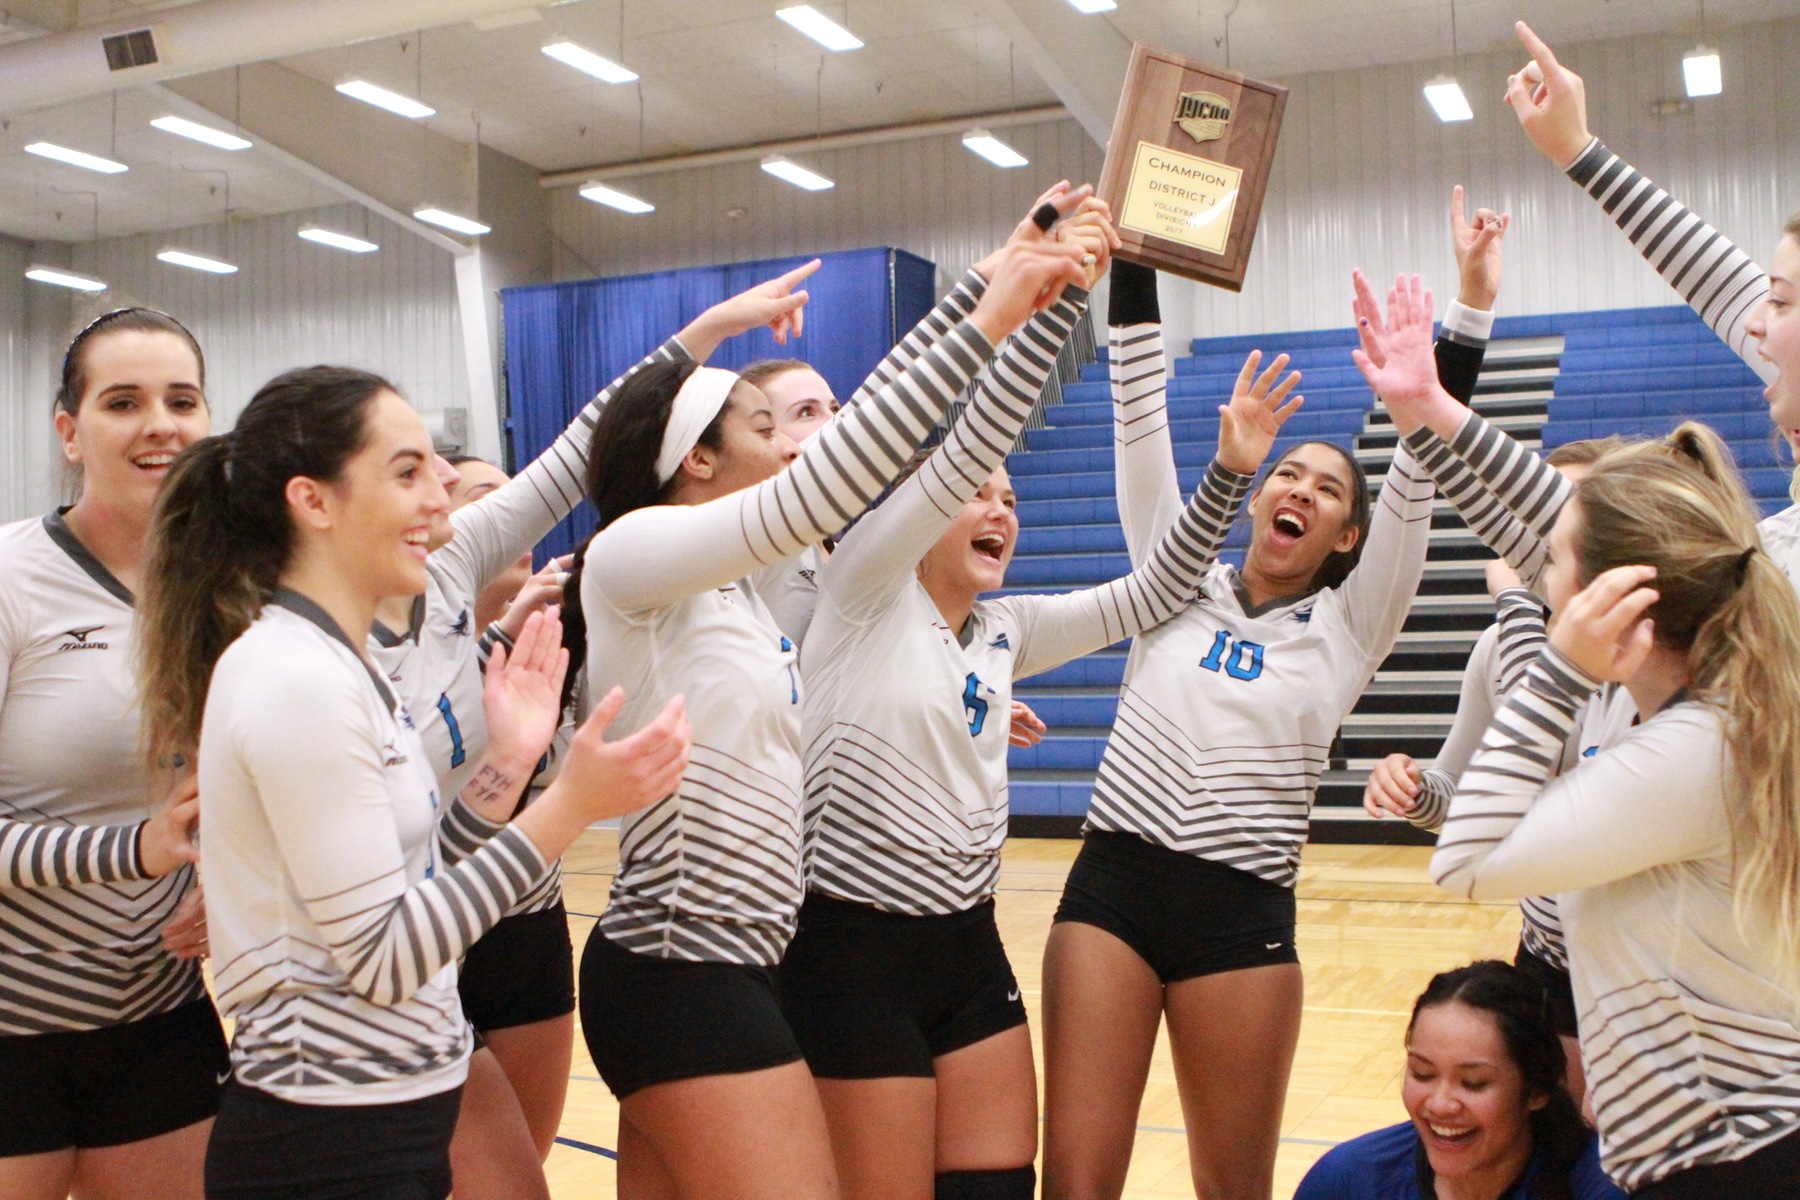 Reivers earn 12th straight trip to nationals